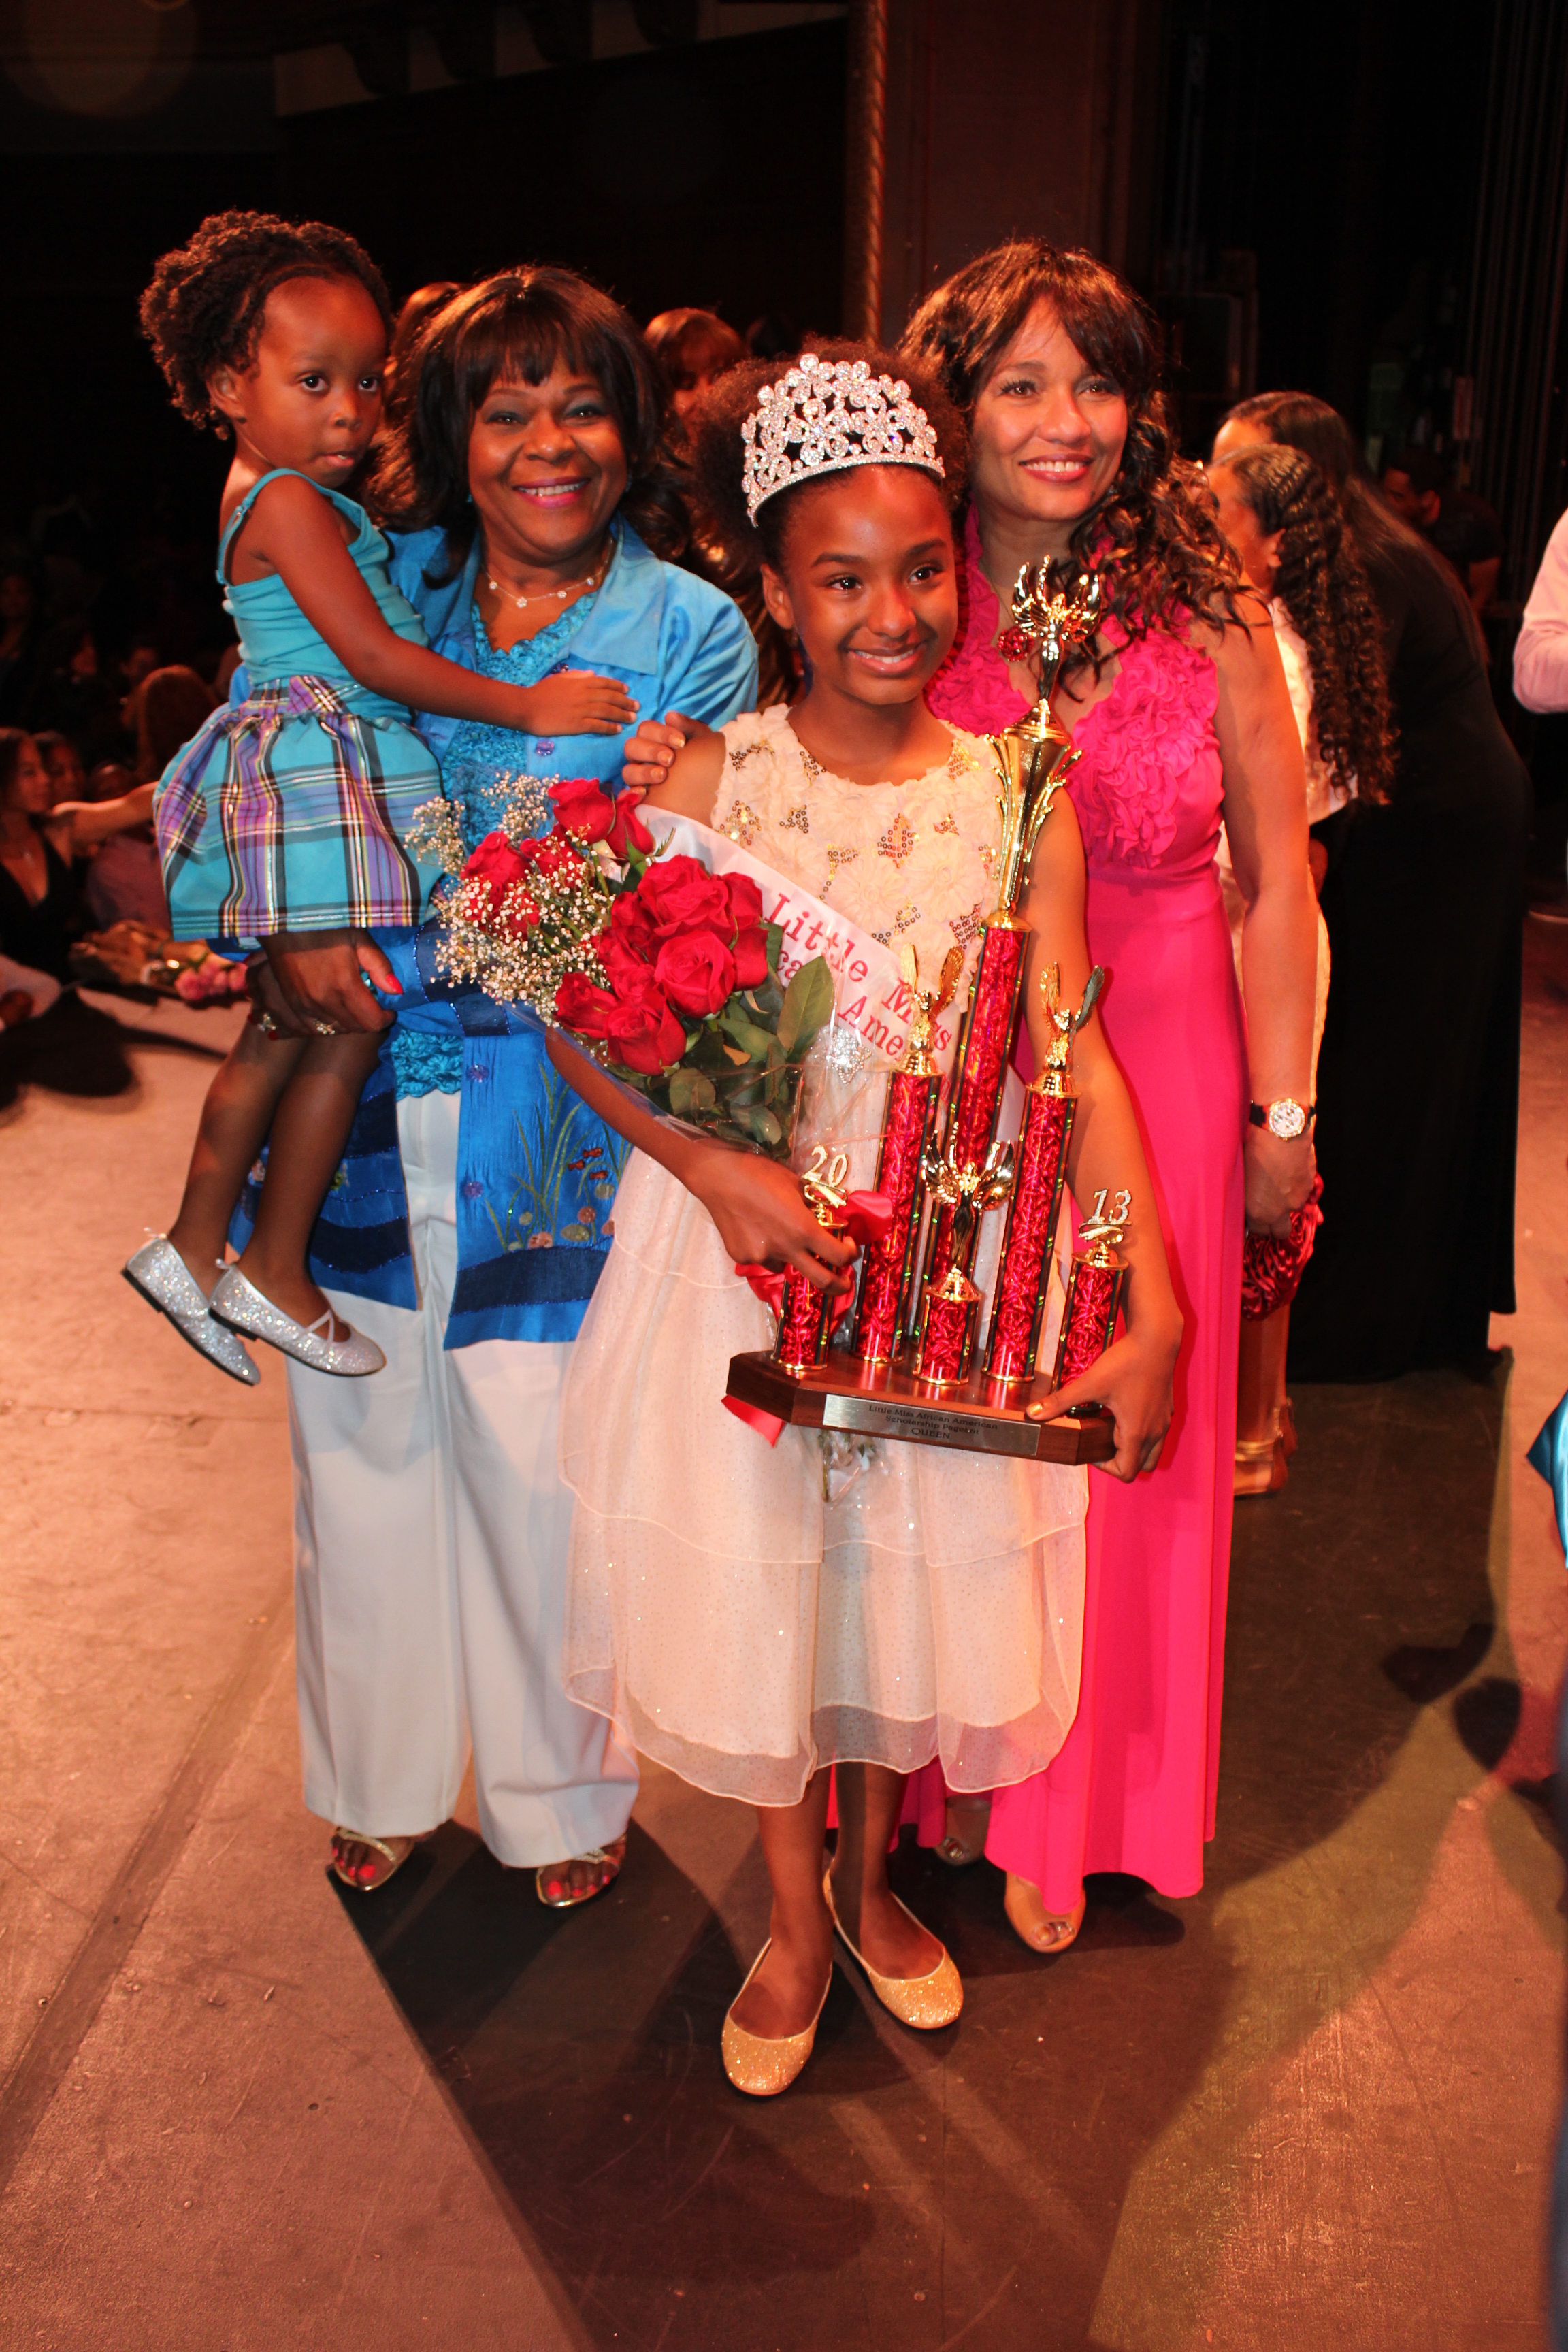 2013 little miss african american scholarship pageant queen nay nay,Ms. Mother love with grandchild and Ms. Ella Joyce was a judge